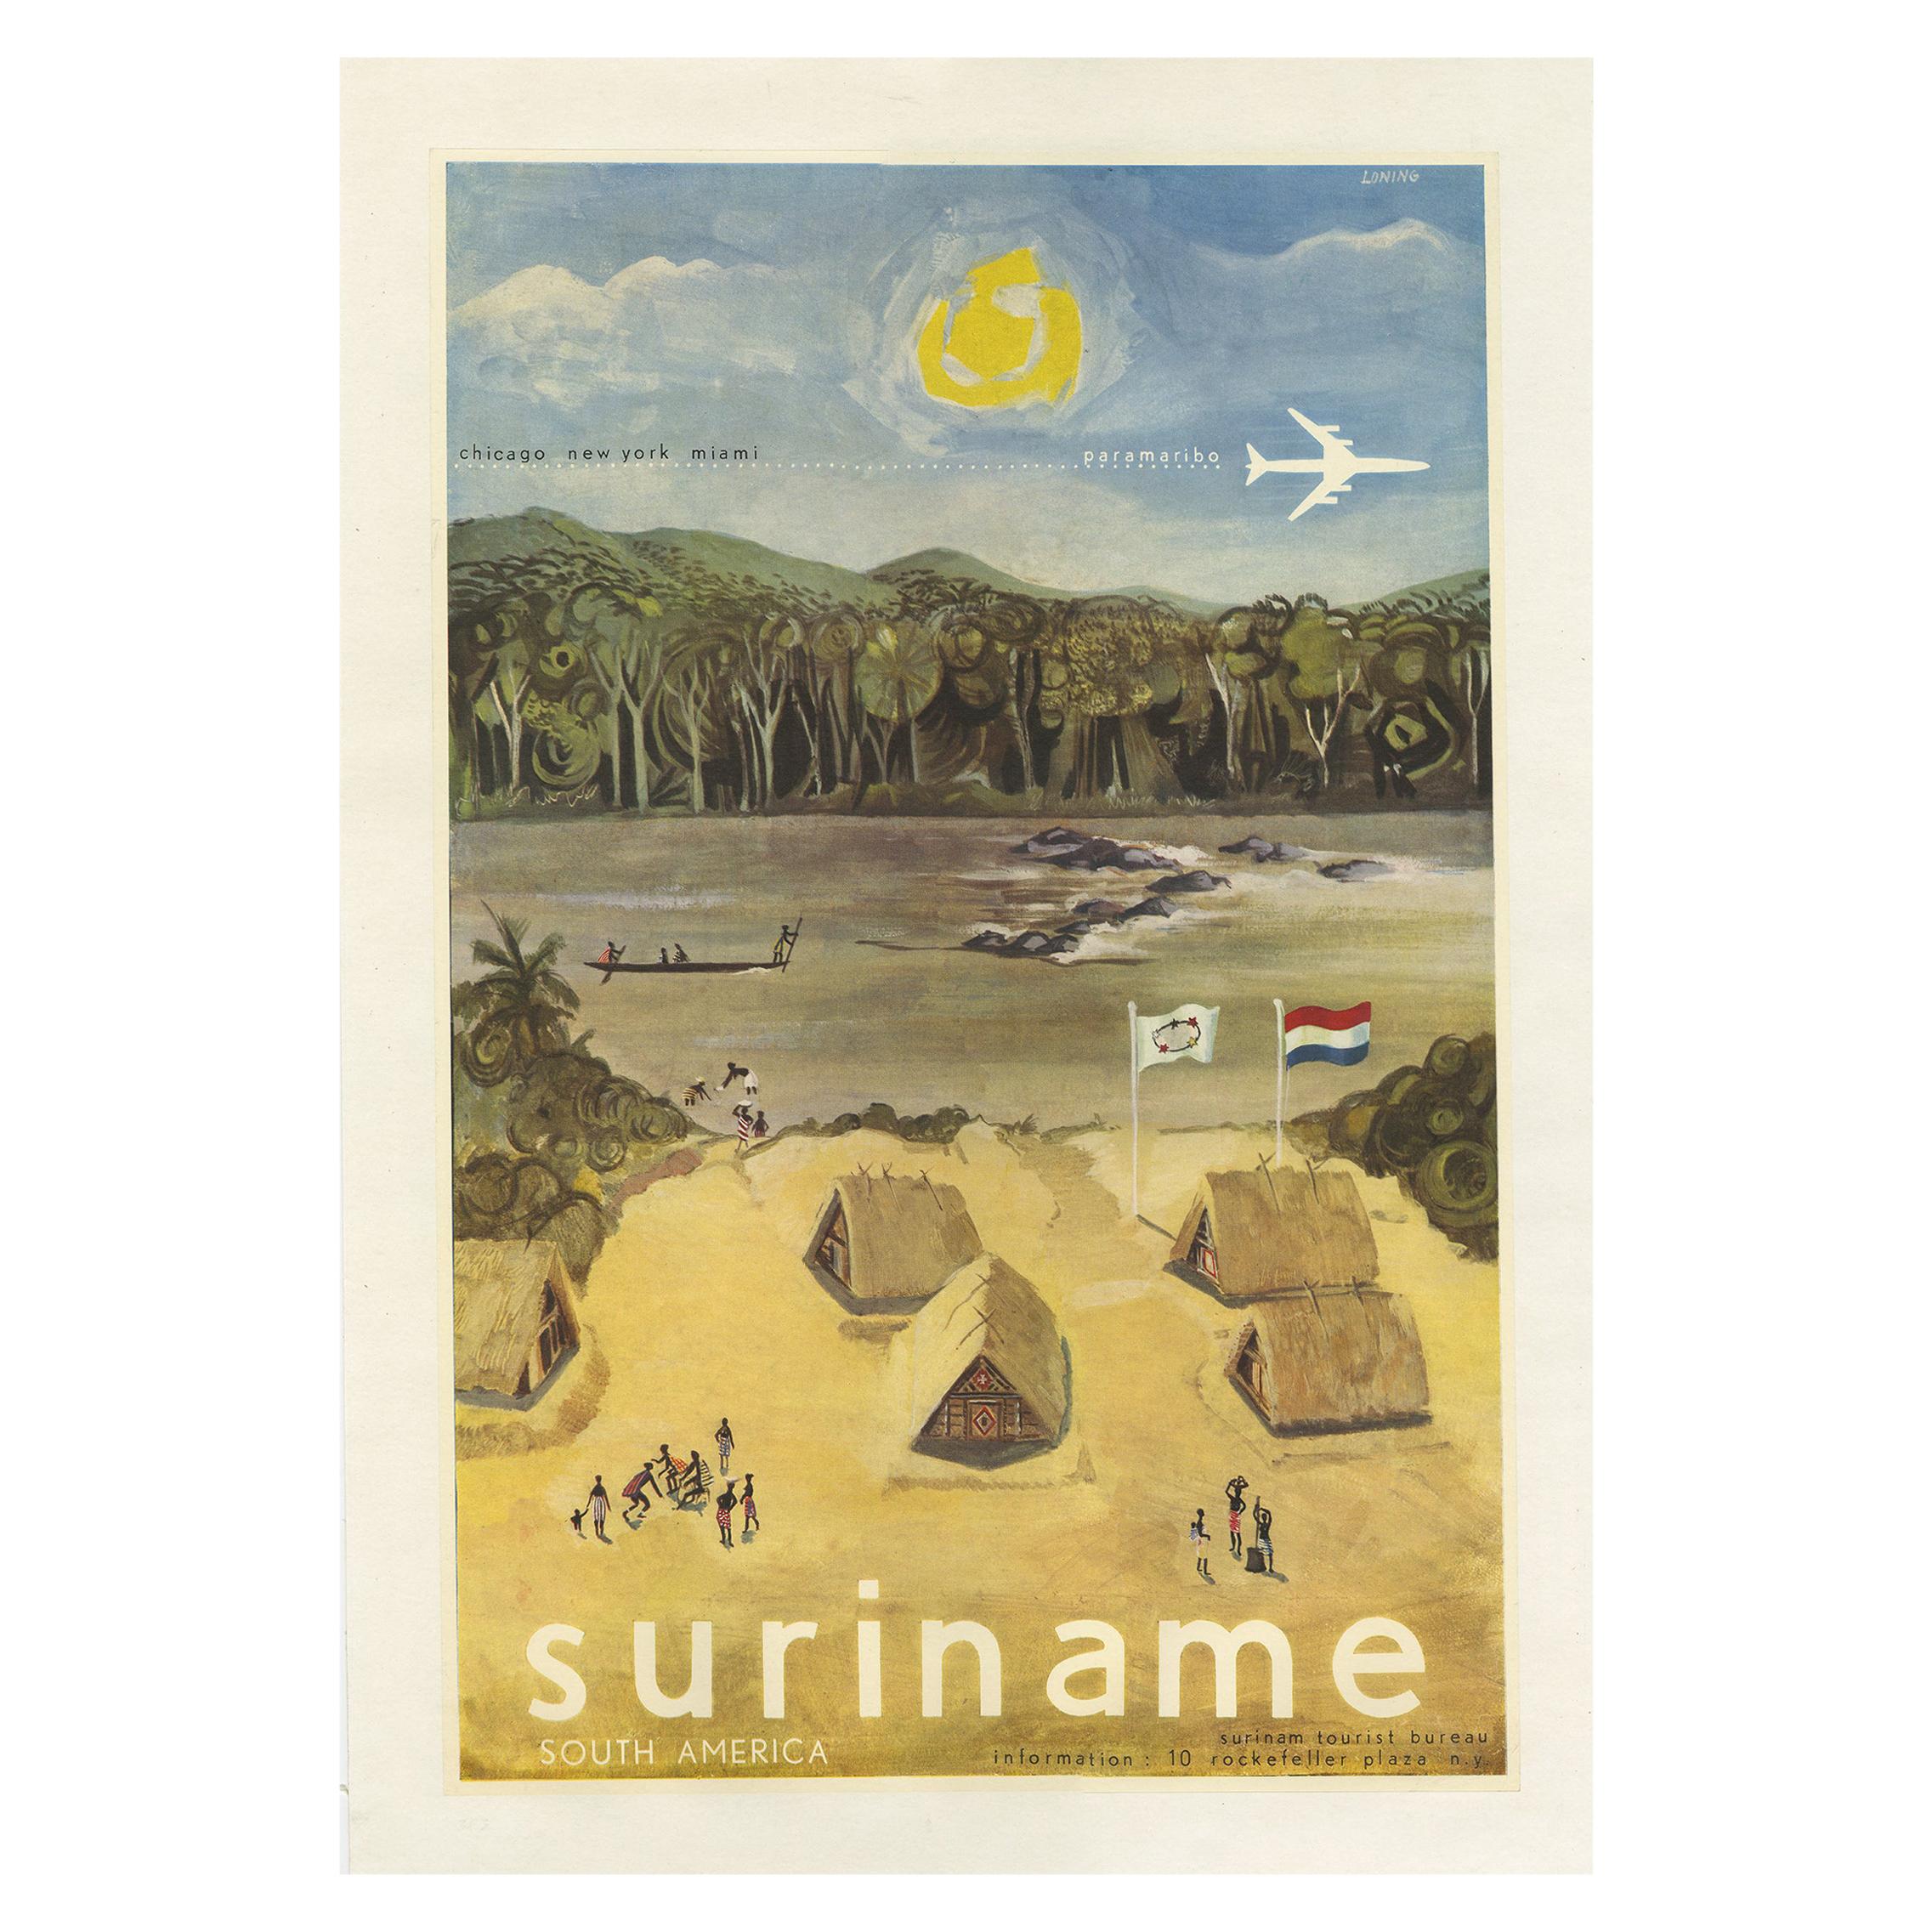 The Vintage Poster Issued by the Suriname Tourist Bureau, circa 1950